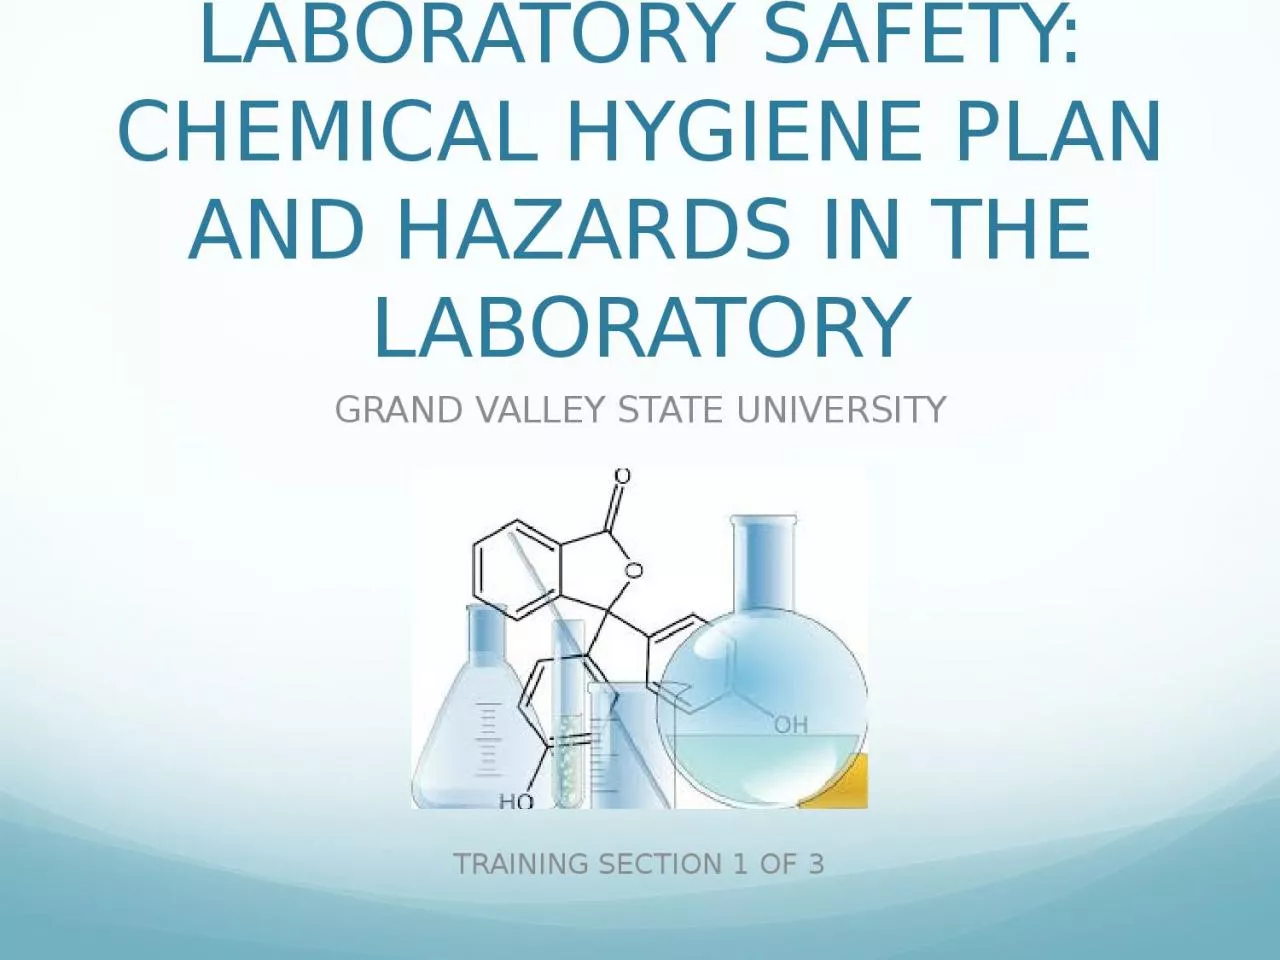 L aboratory Safety: Chemical Hygiene Plan and Hazards in the Laboratory